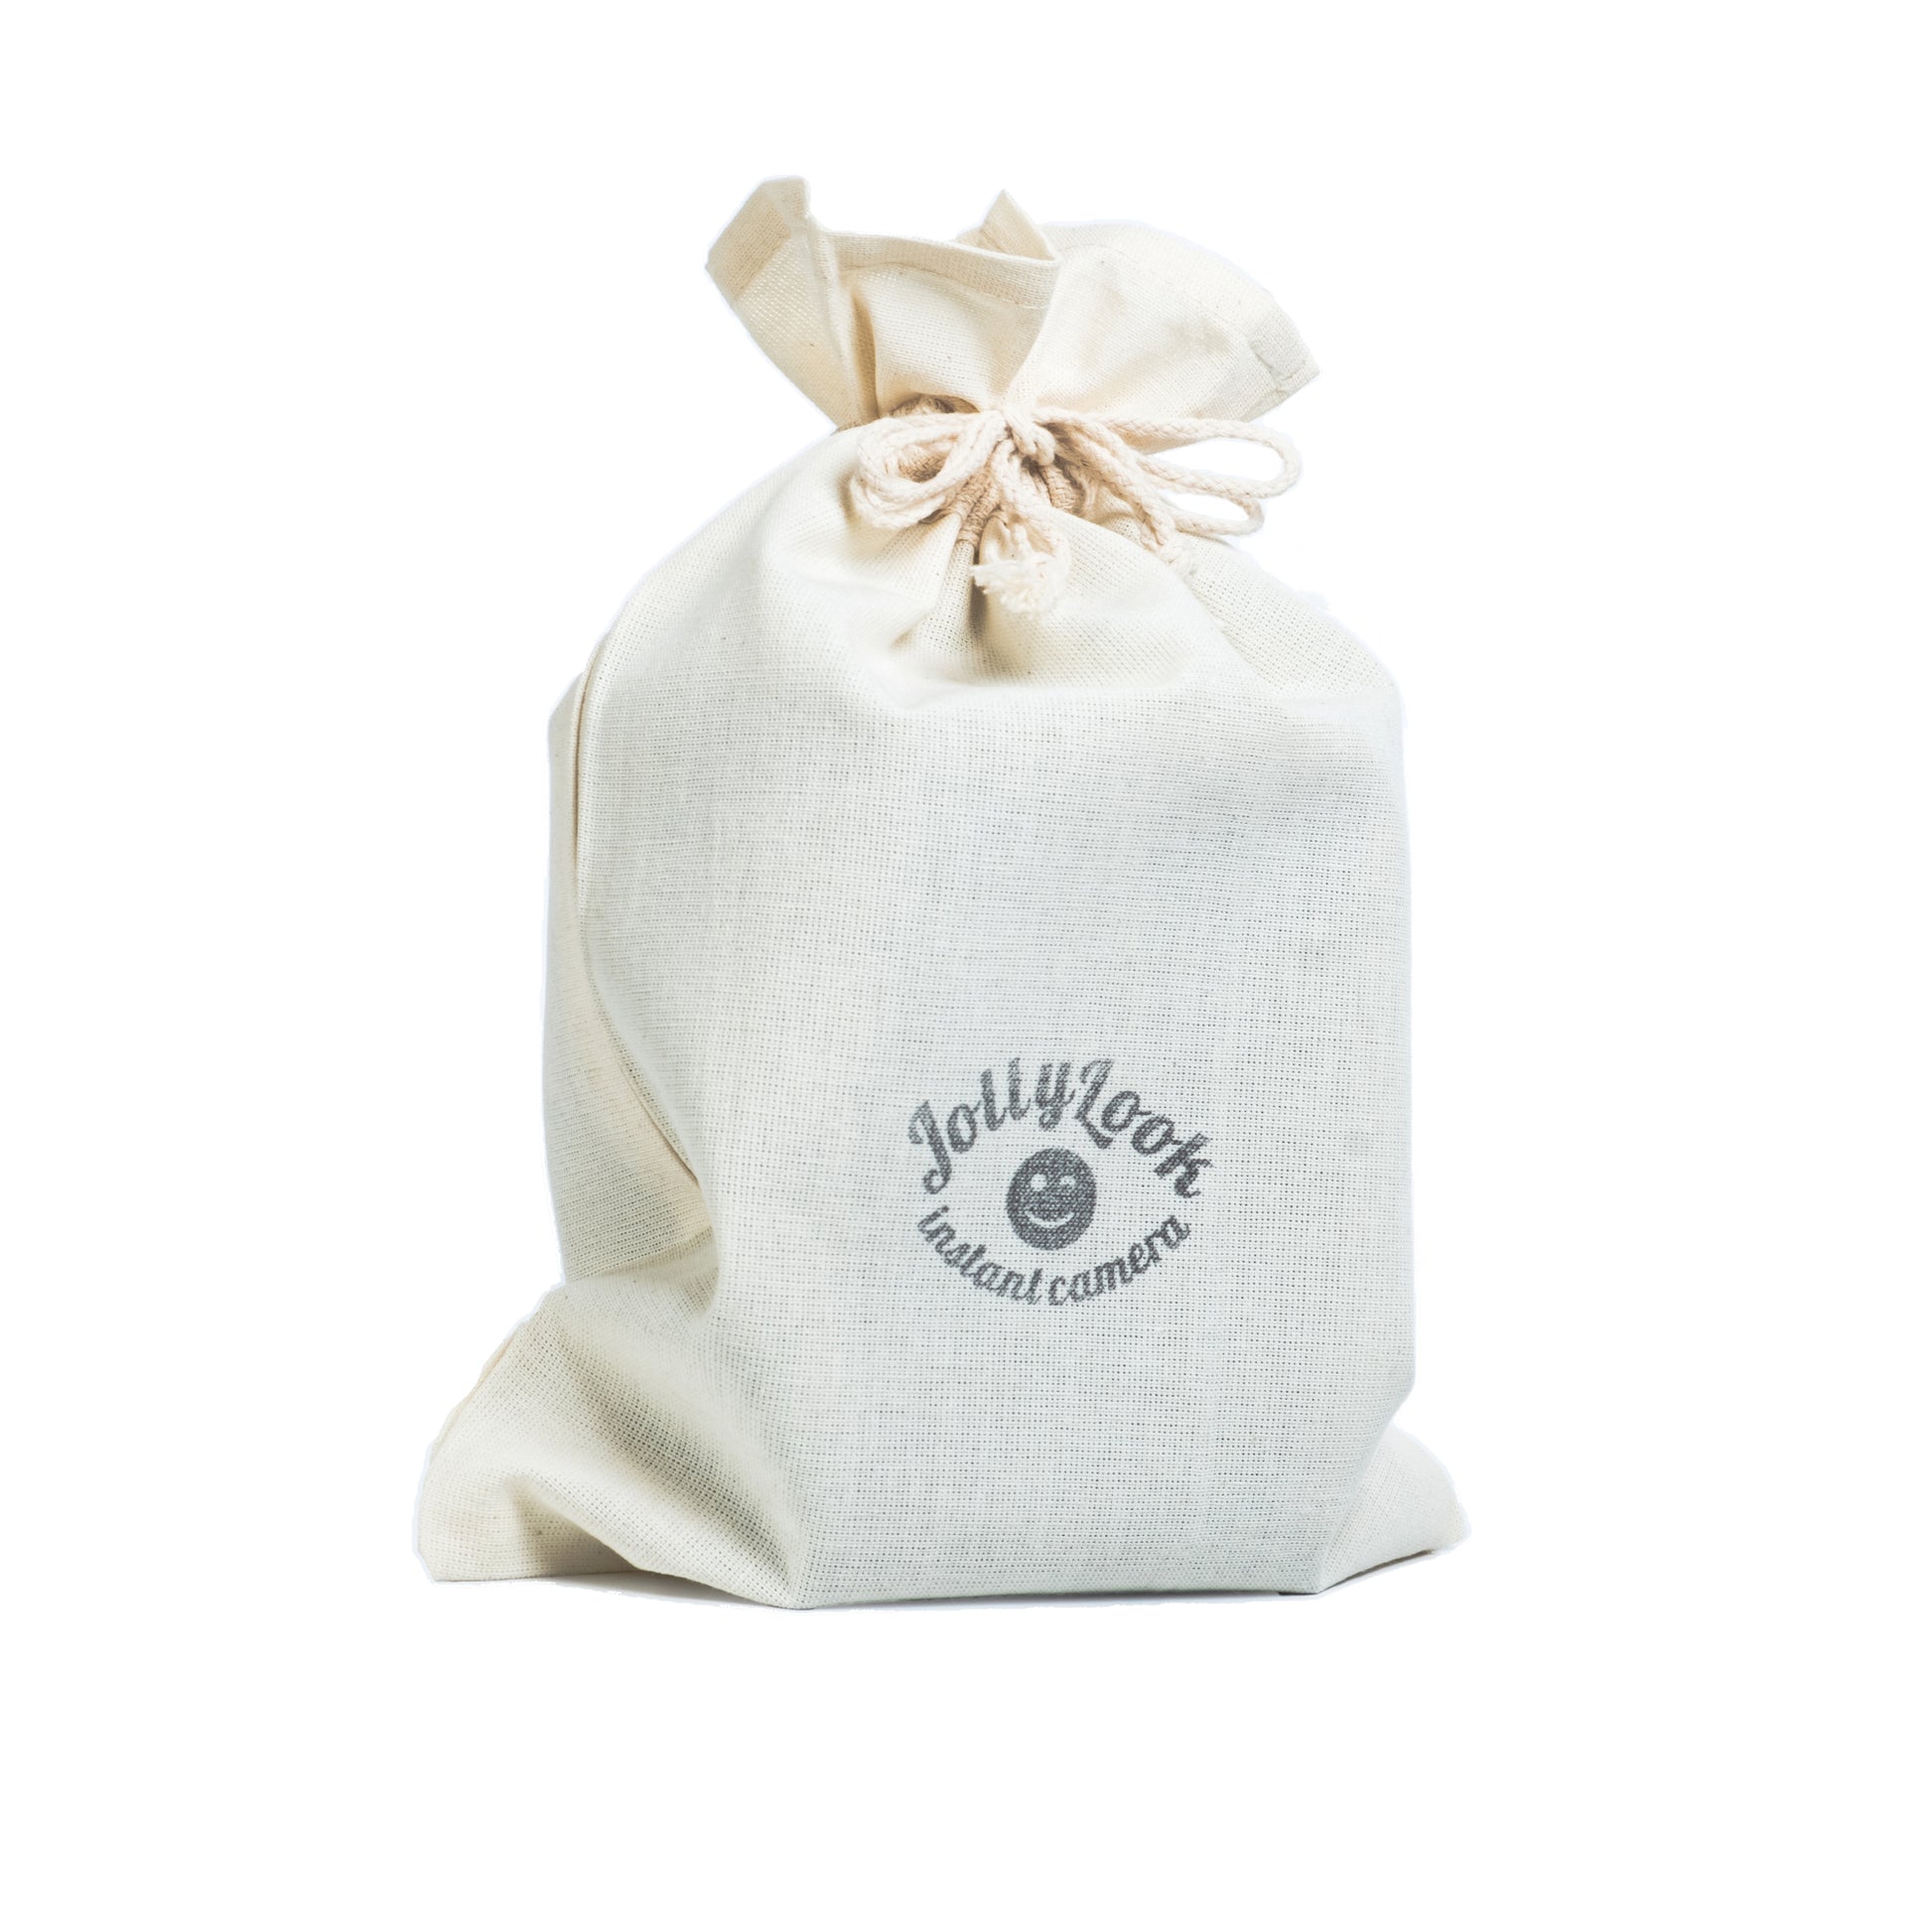 Fabric eco-friendly bag with the Jollylook camera in it against a white background, featuring the Jollylook logo and an official seal prominently displayed on its surface. 